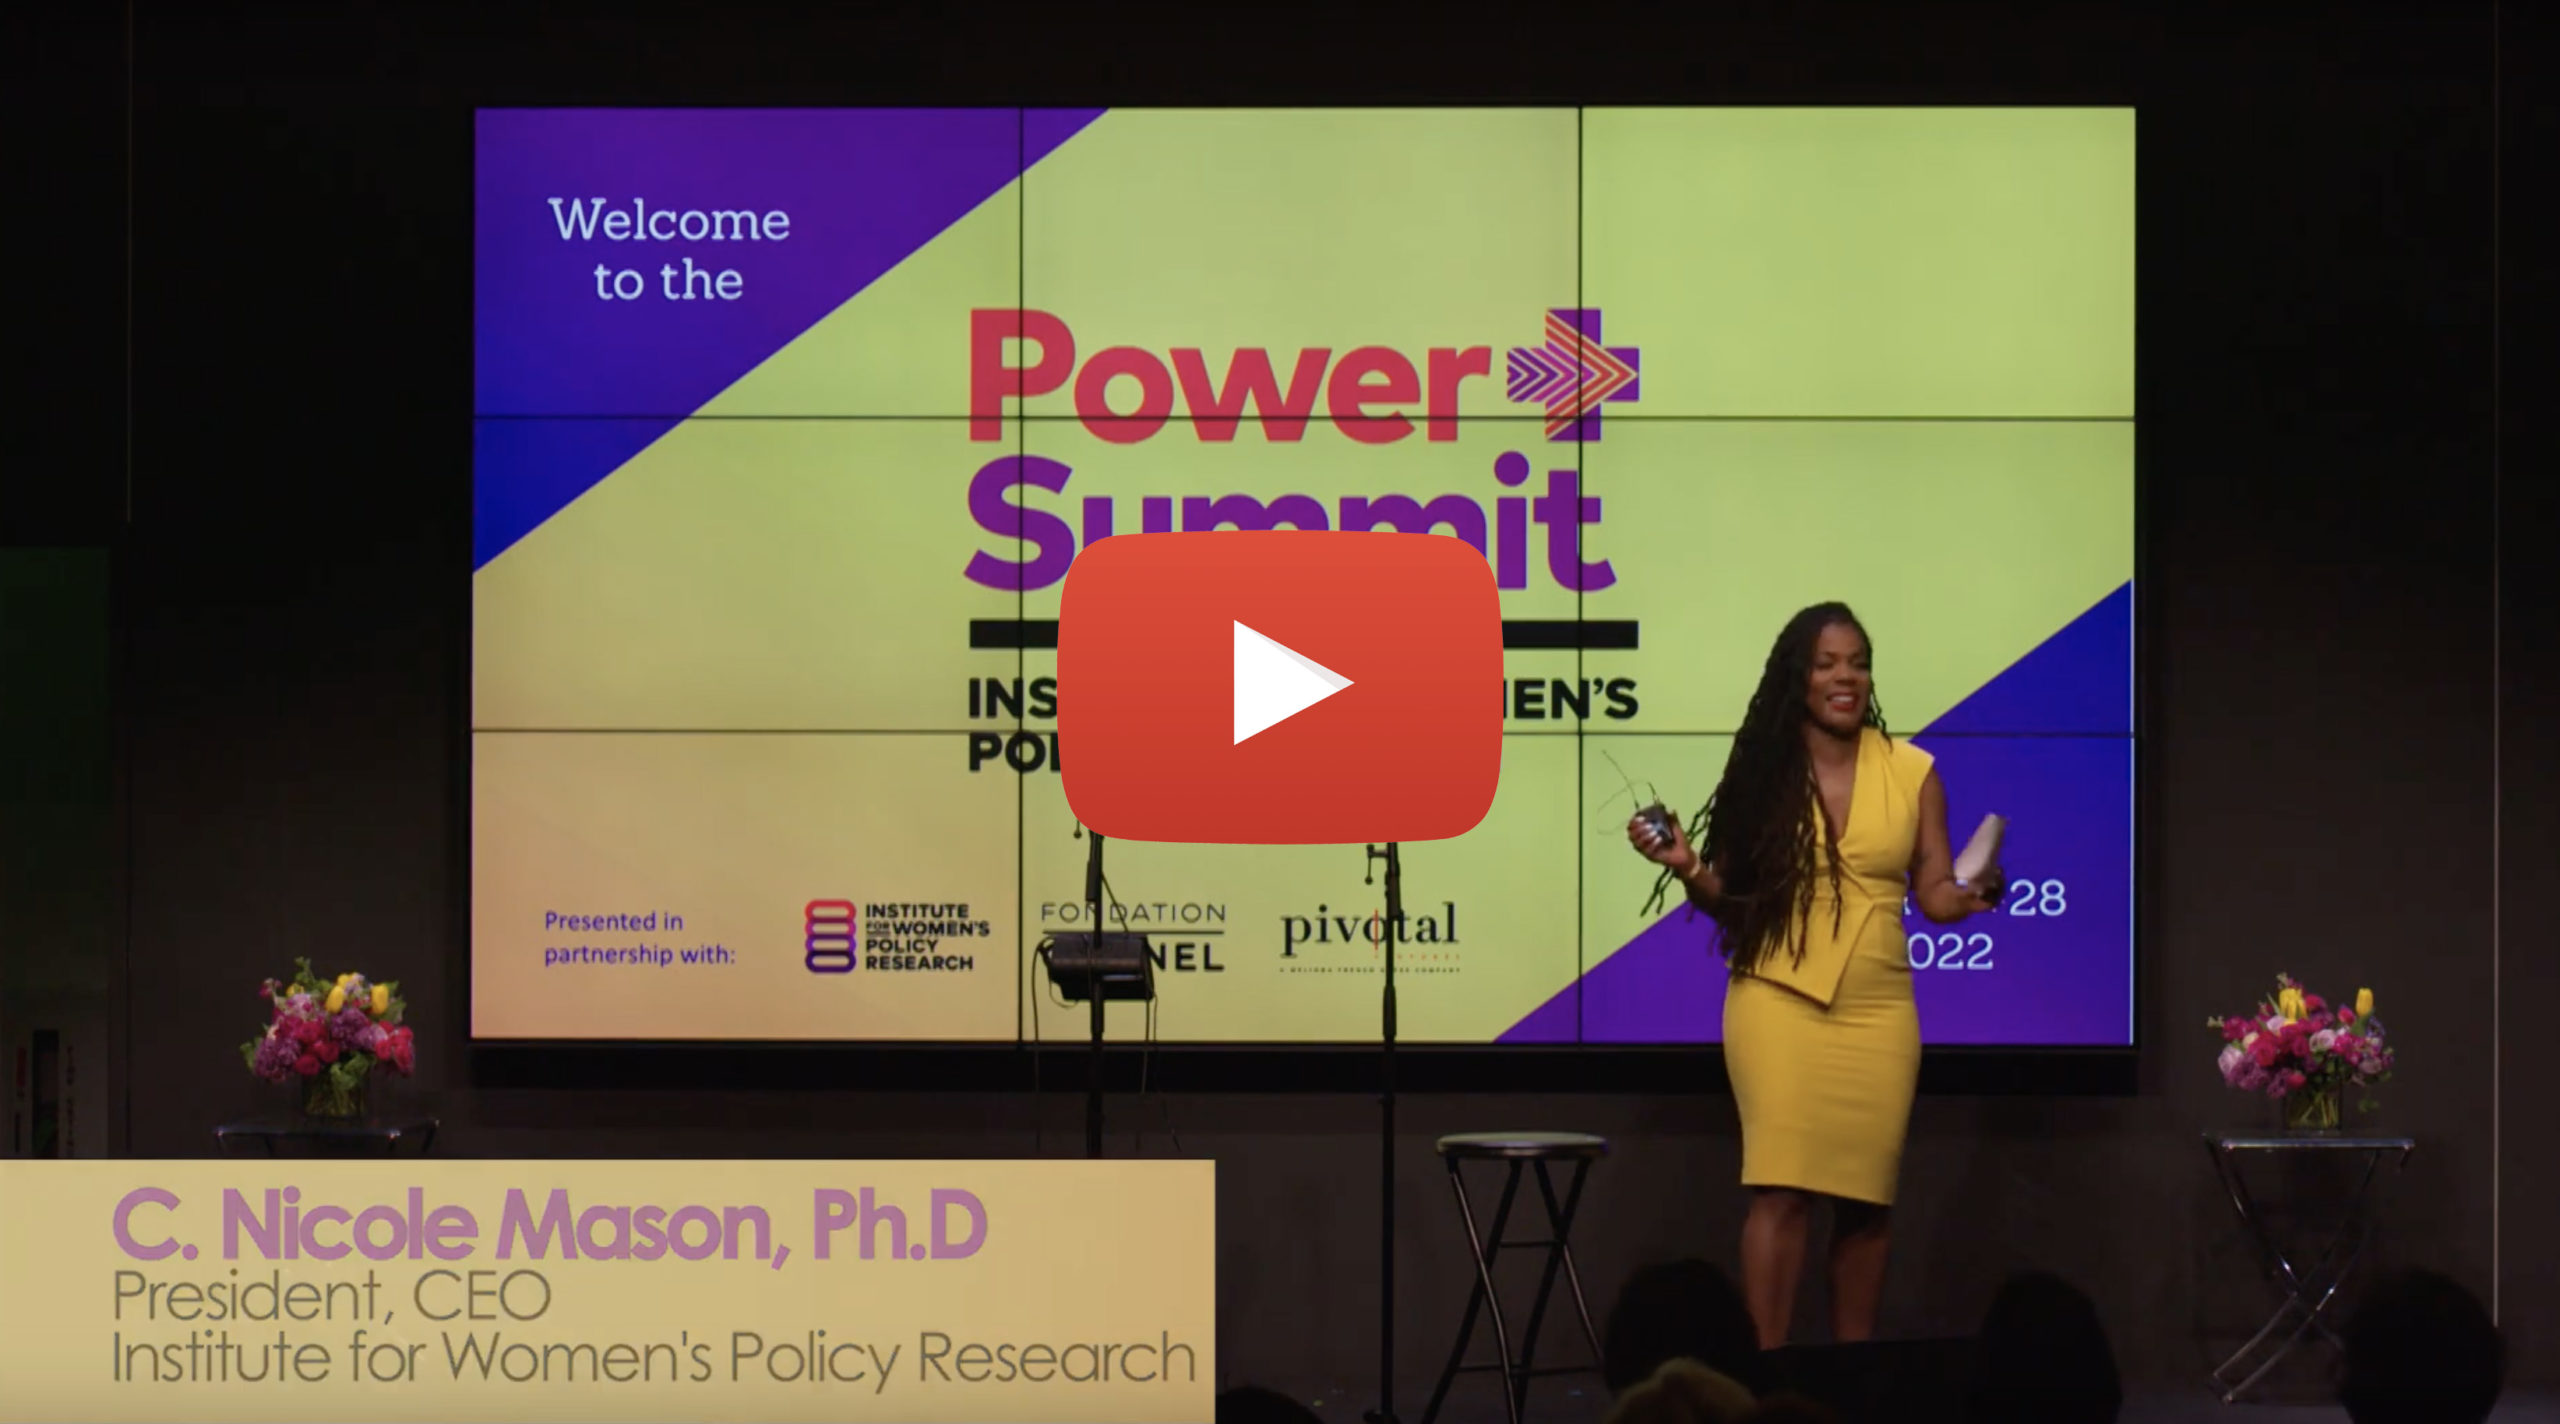 IWPR President C. Nicole Mason welcomes virtual and in-person attendees to the first-annual Power+ Summit live from San Francisco, California.